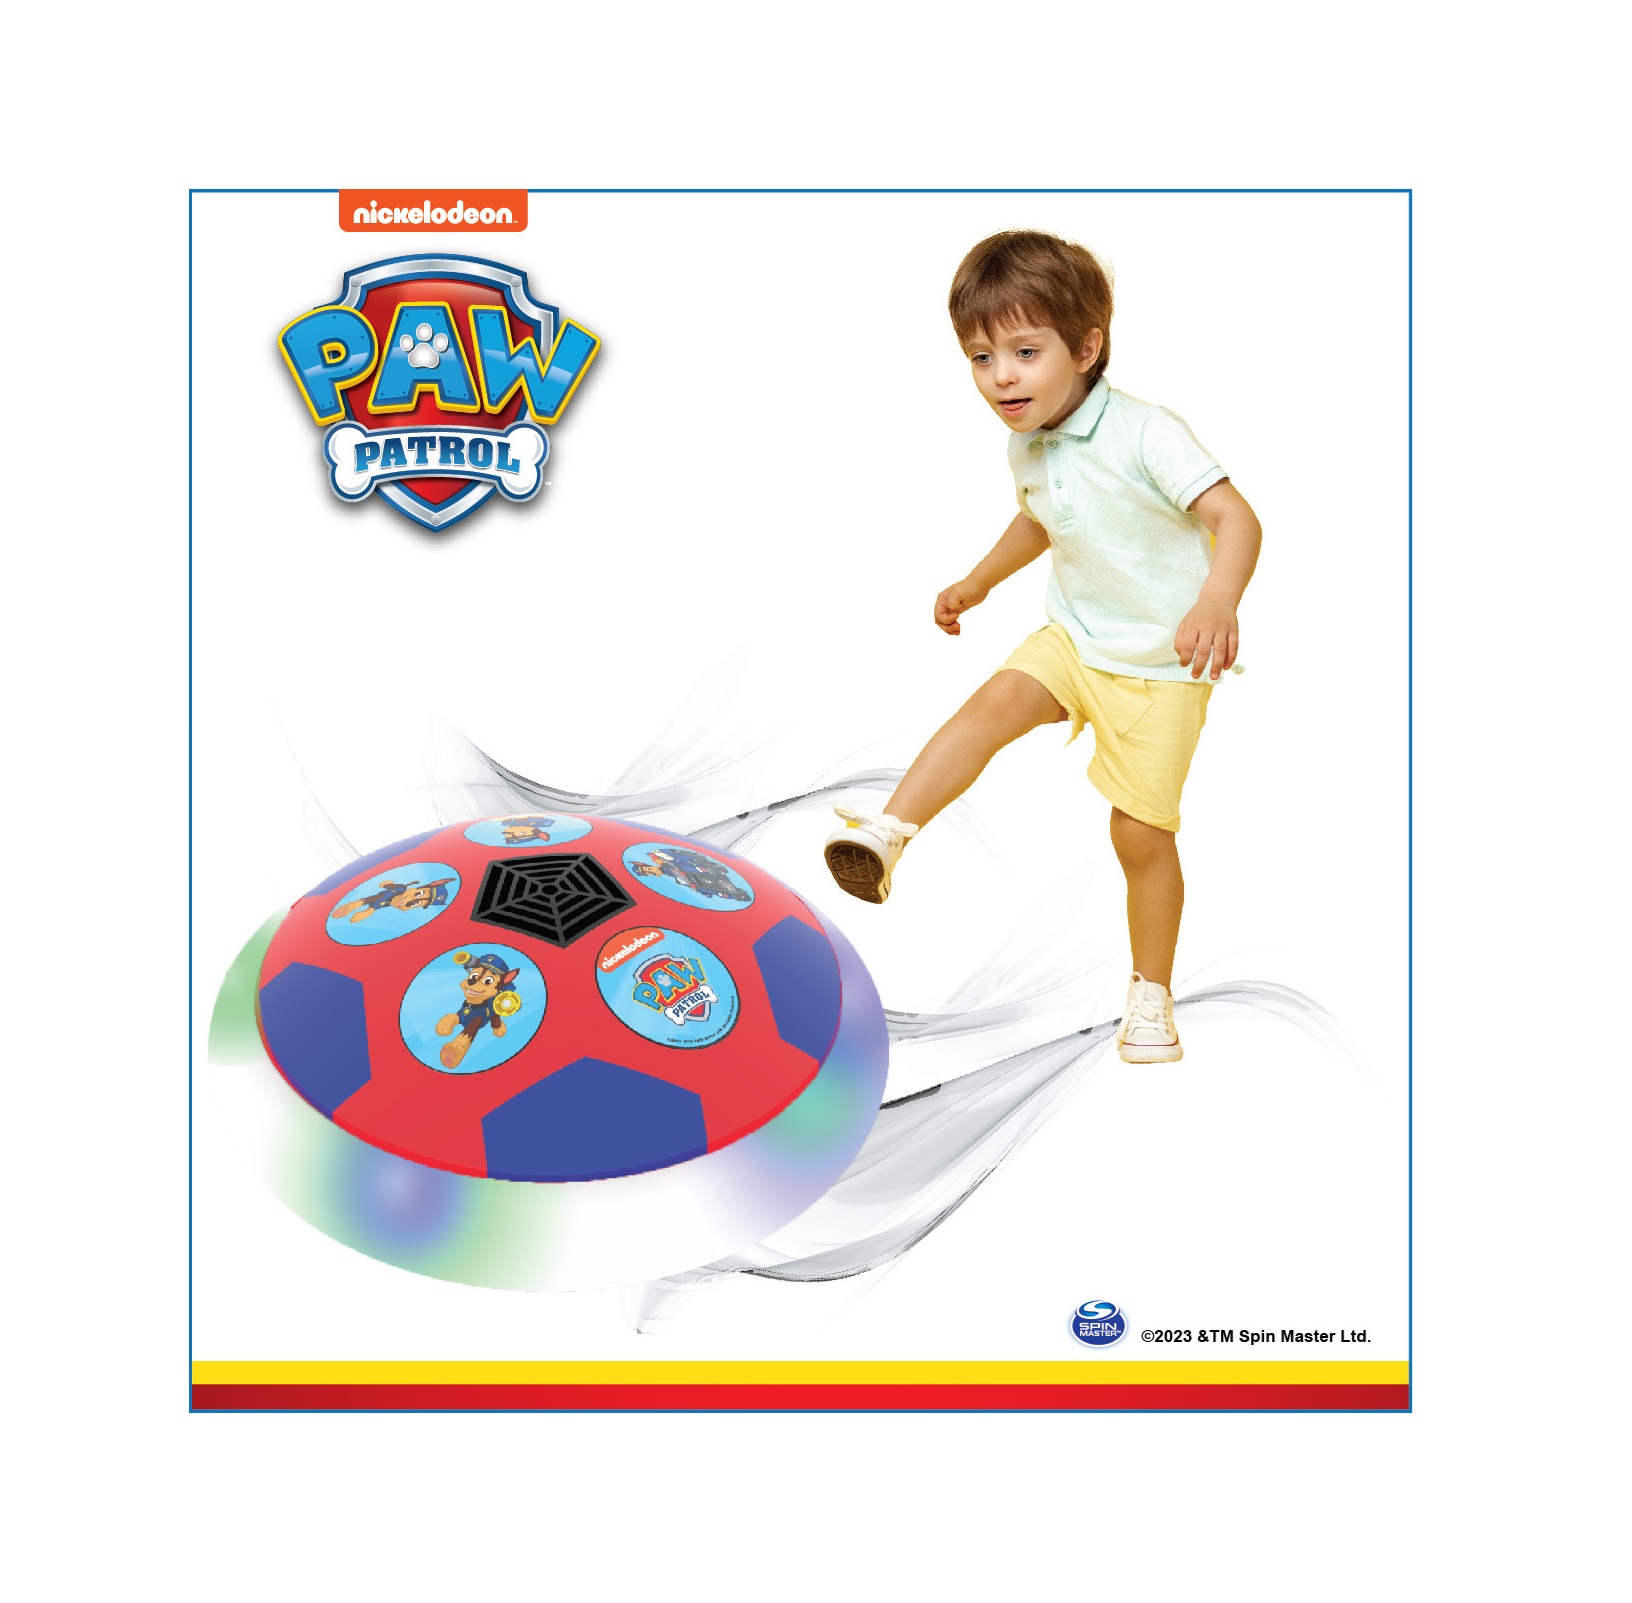 PlayMagic Hover Ball - Paw Patrol Chase